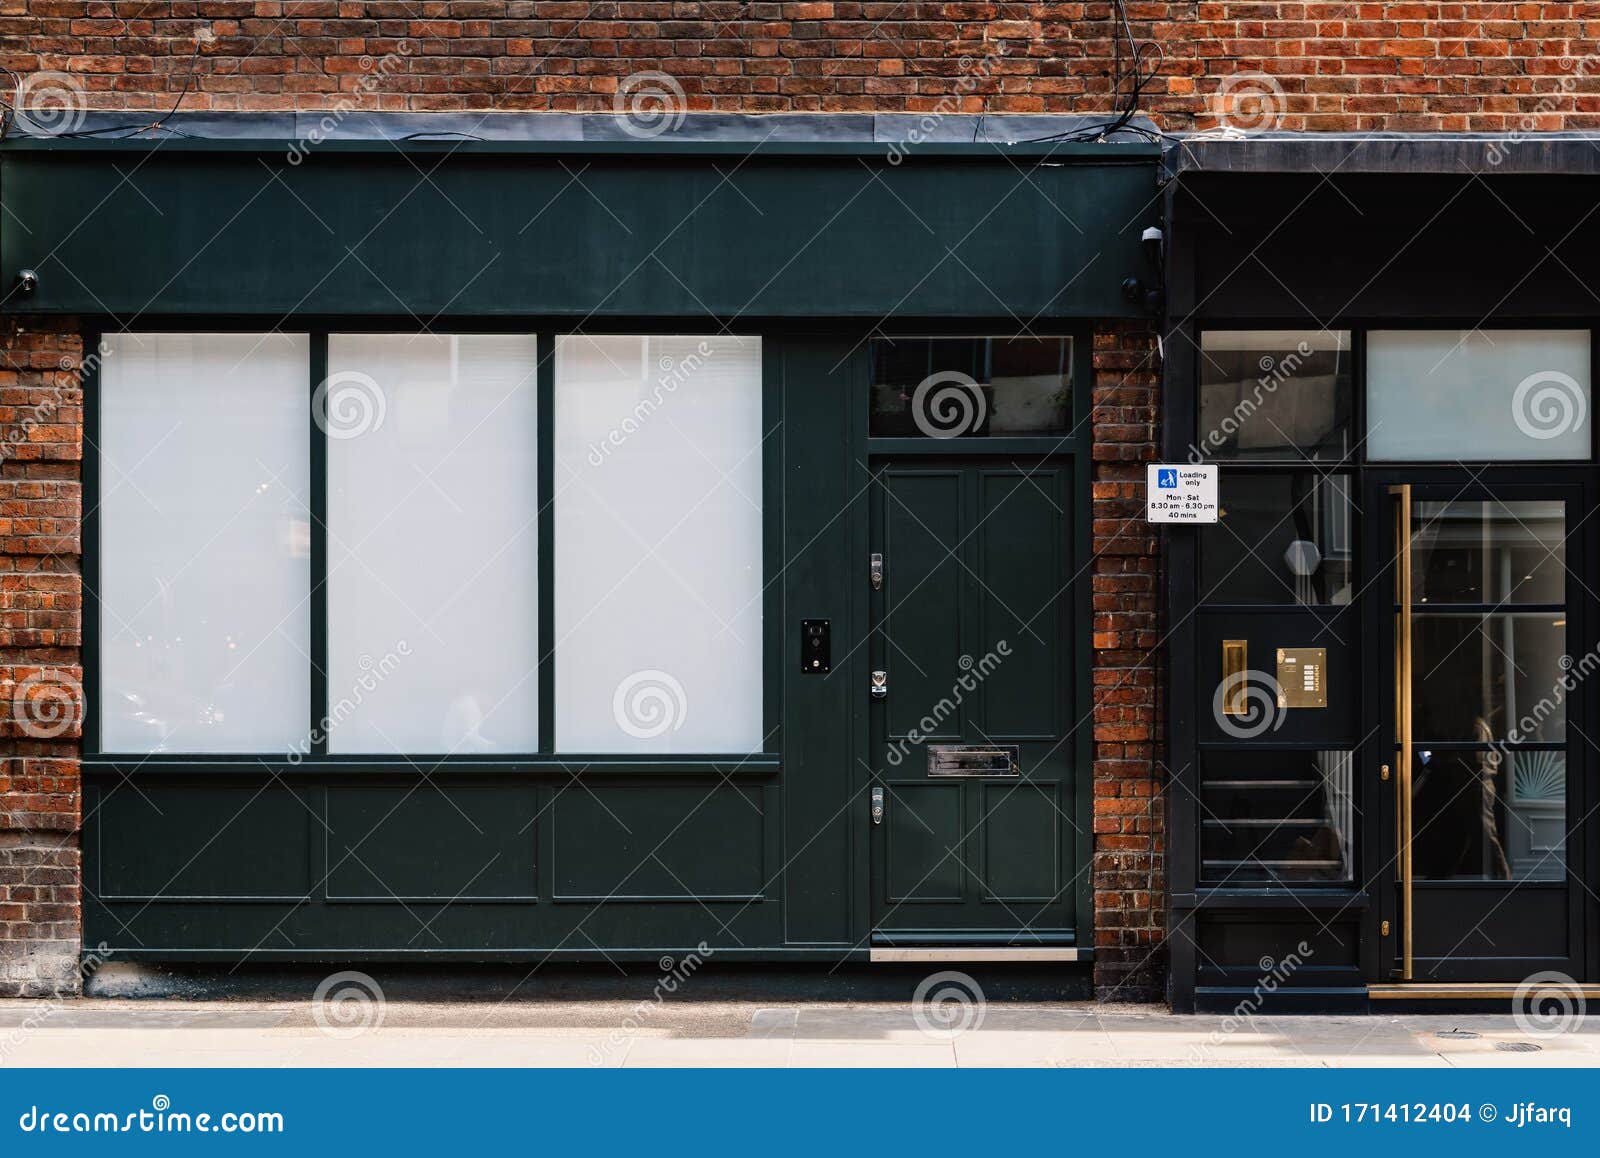 vintage classic shop boutique storefront with place for name